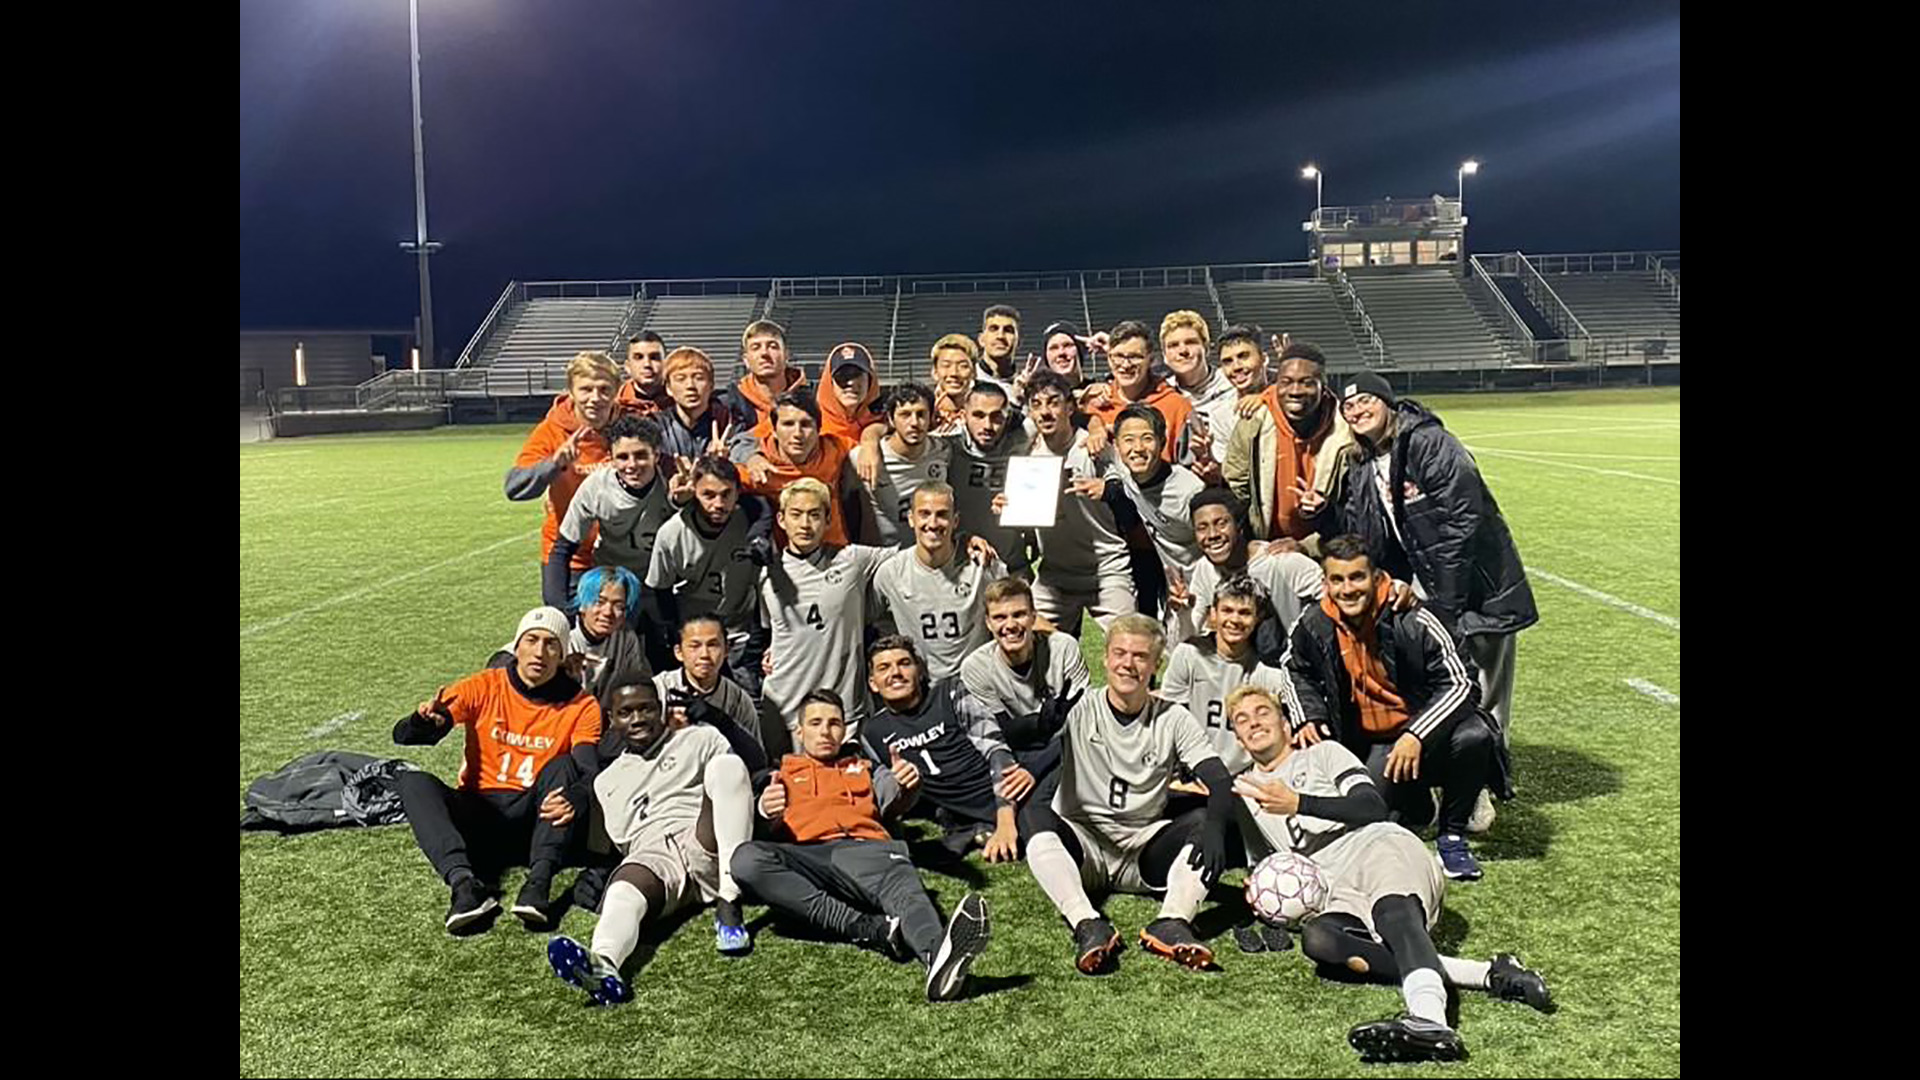 Tiger soccer wins again, takes unbeaten record into national tourney